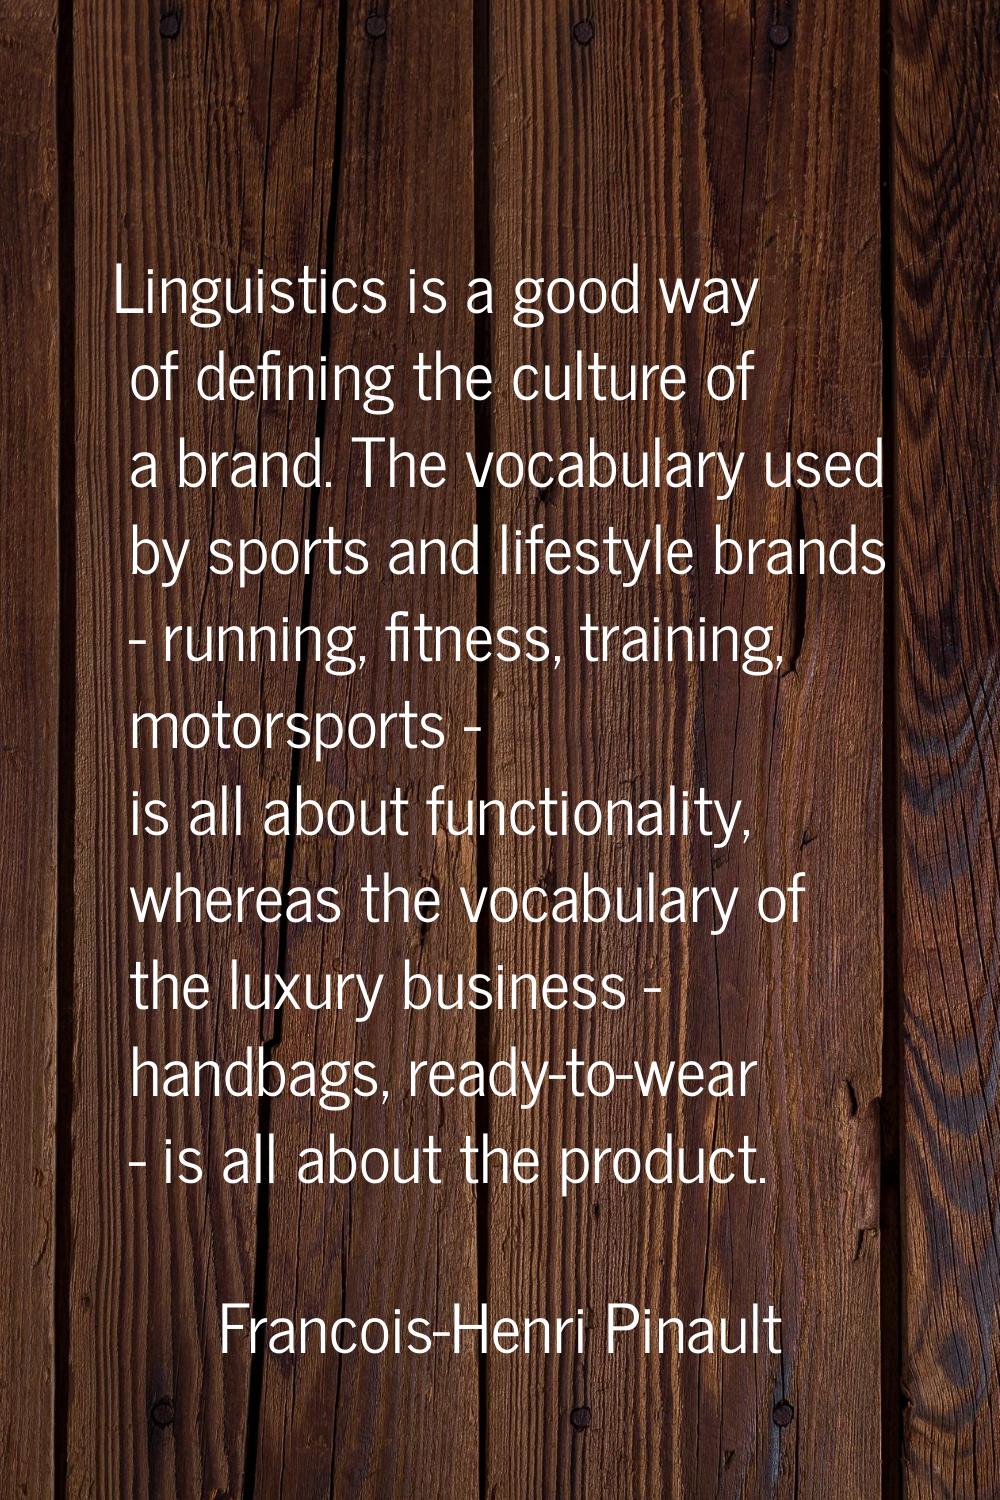 Linguistics is a good way of defining the culture of a brand. The vocabulary used by sports and lif